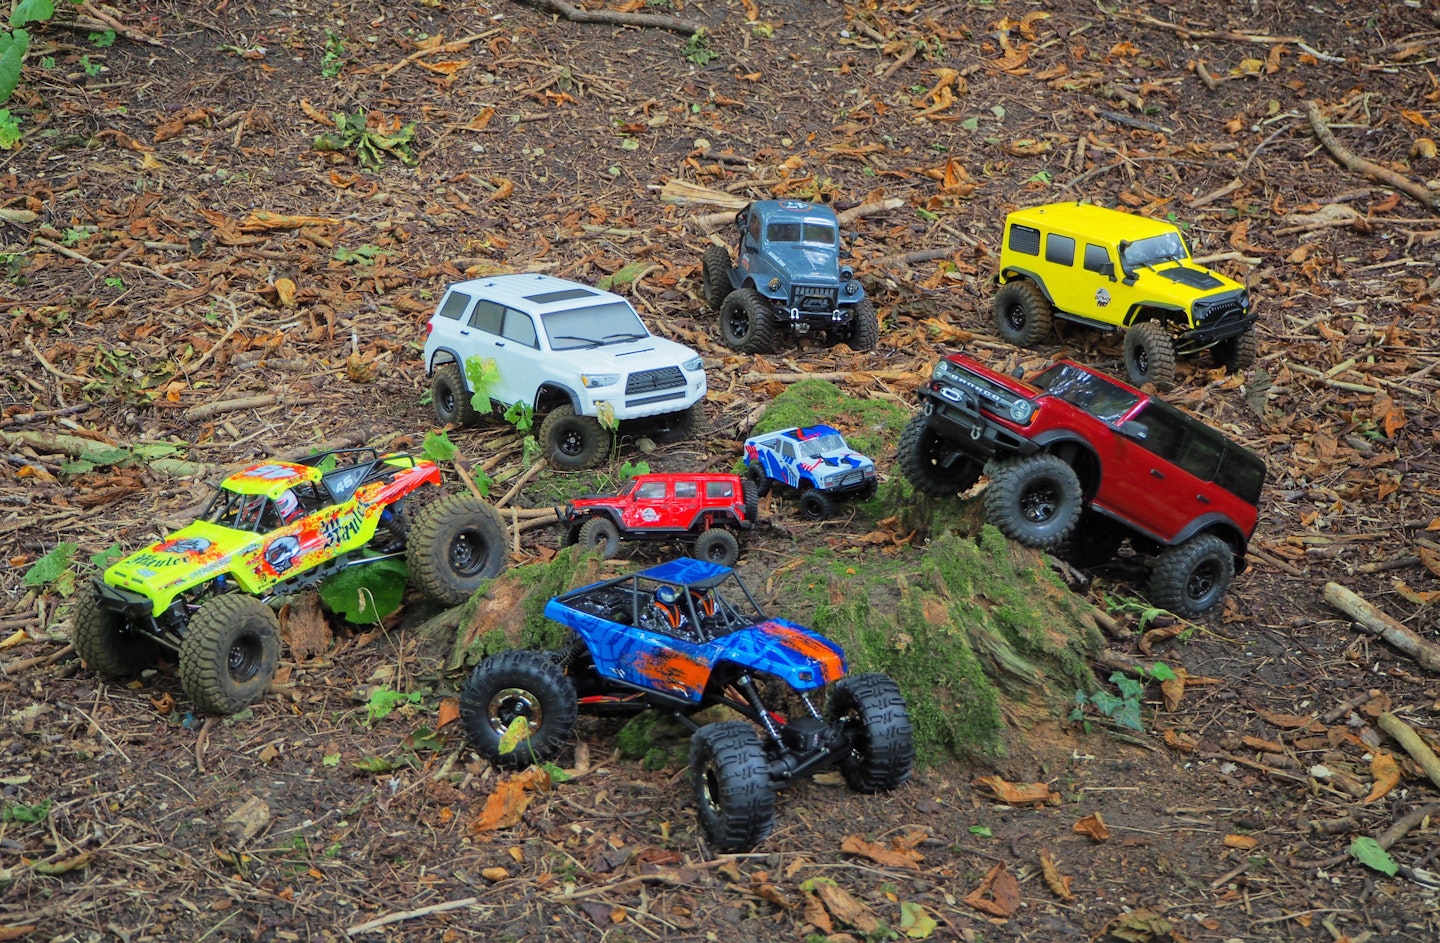 All rock crawlers grouped together on a tree stump